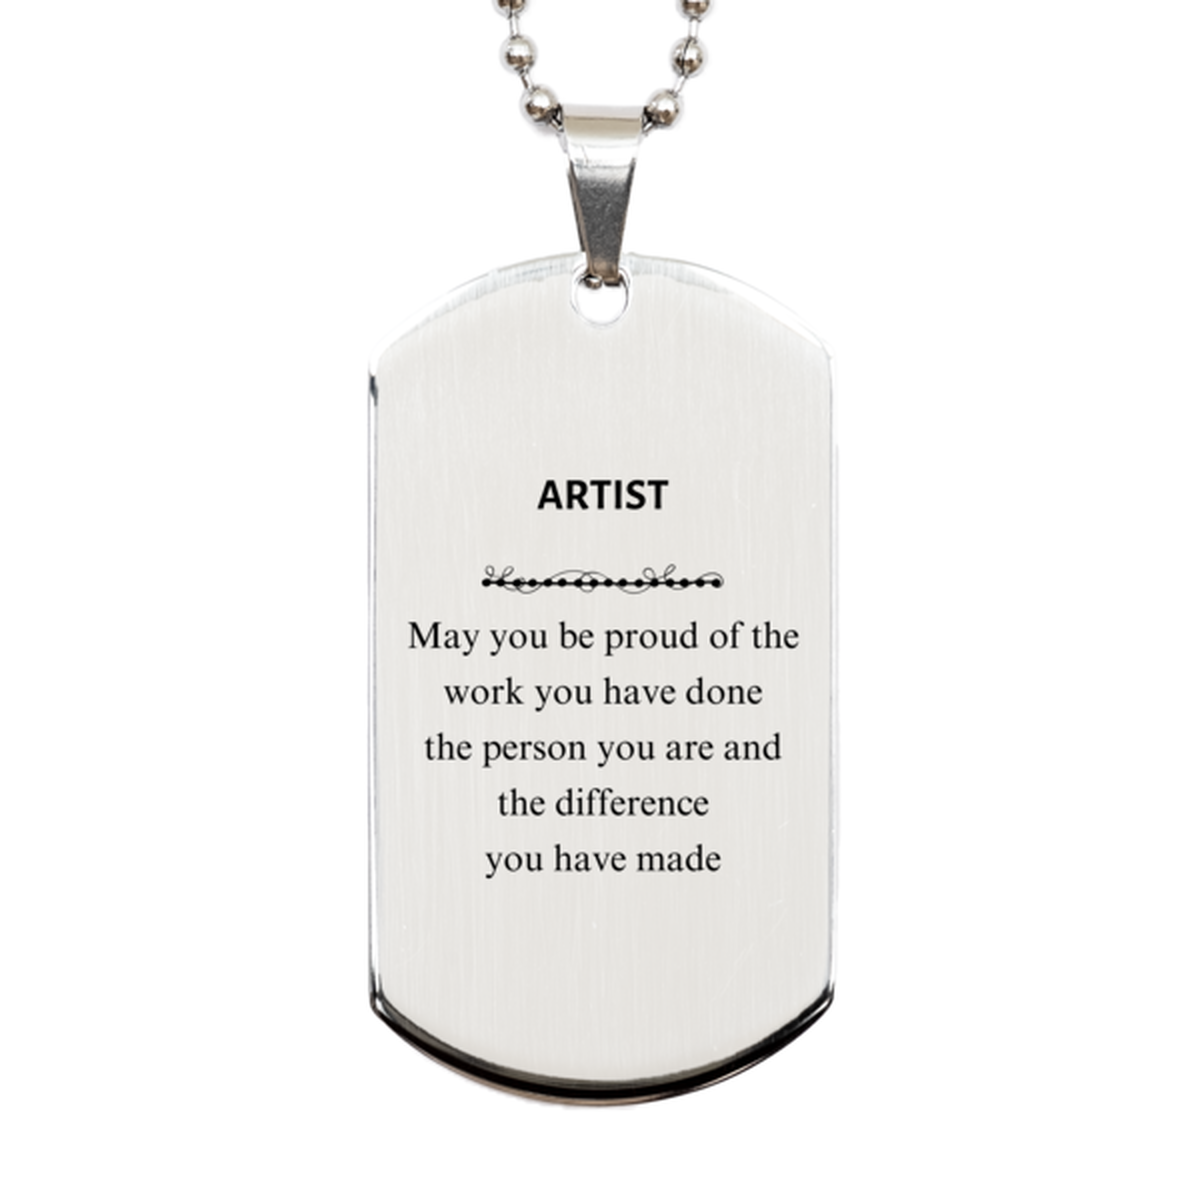 Artist May you be proud of the work you have done, Retirement Artist Silver Dog Tag for Colleague Appreciation Gifts Amazing for Artist